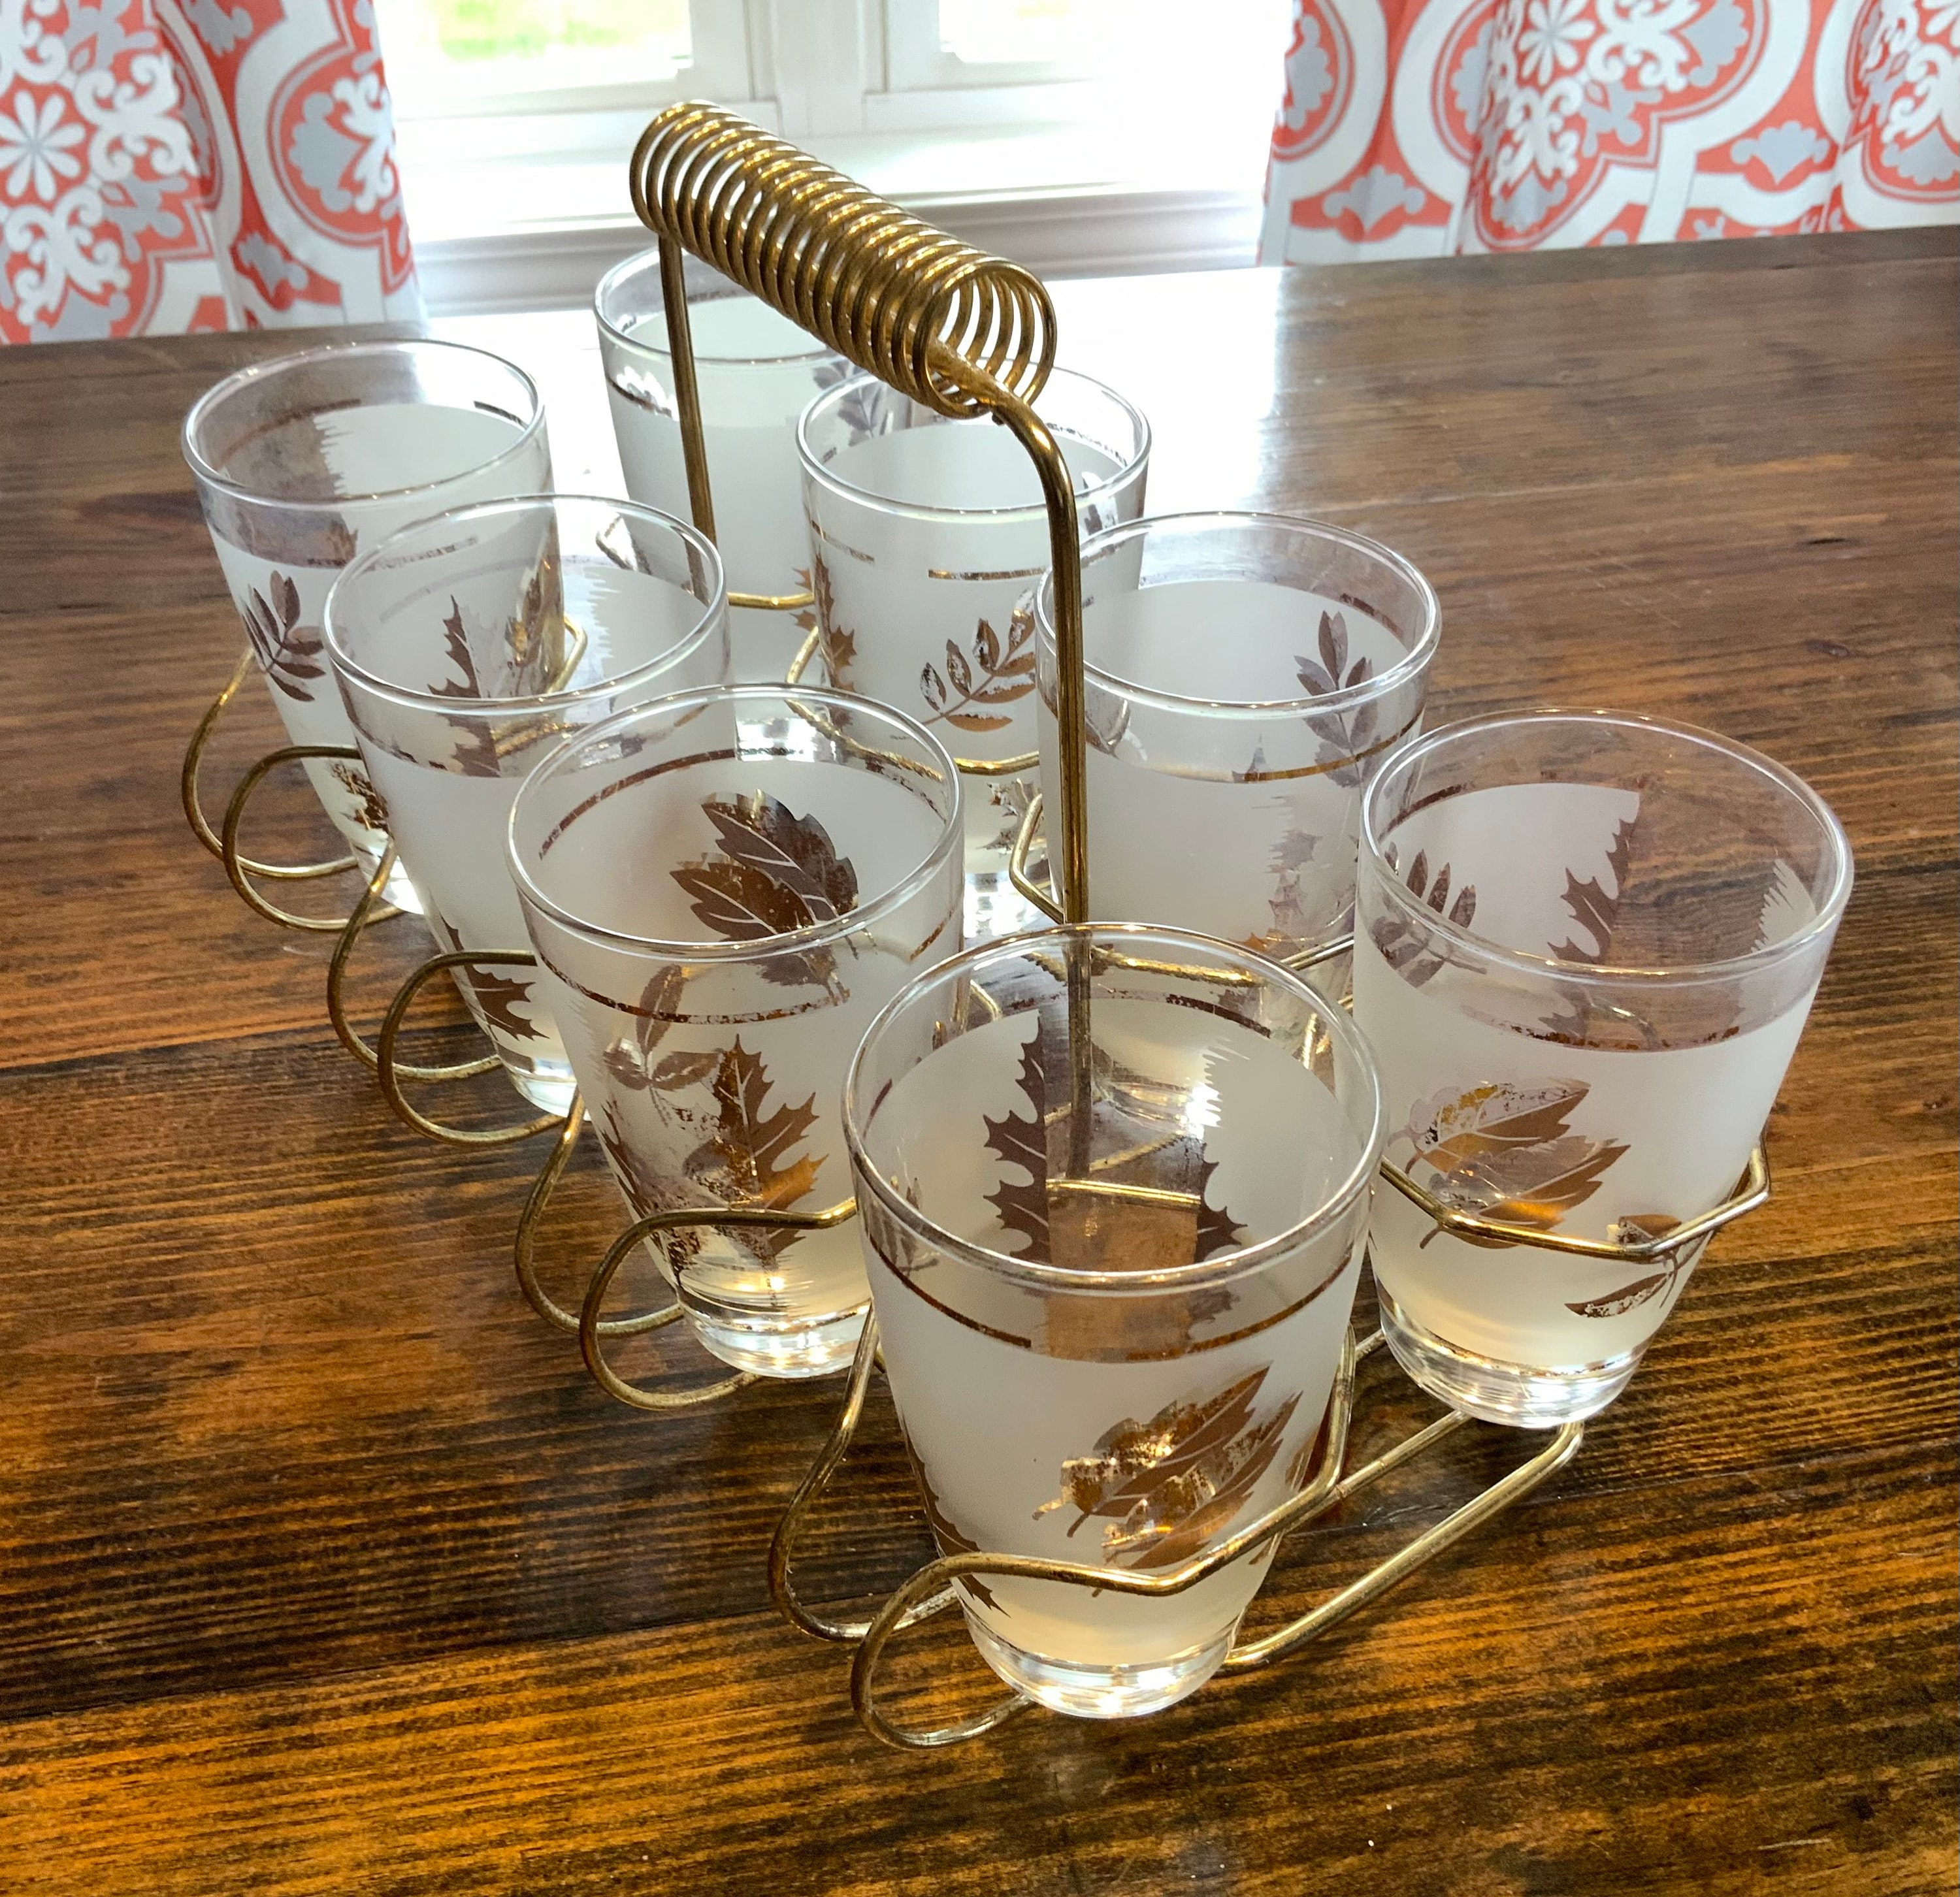 Golden Foliage Leaf Highball Glasses Set of 8 and Ice Bucket by Libby Glass